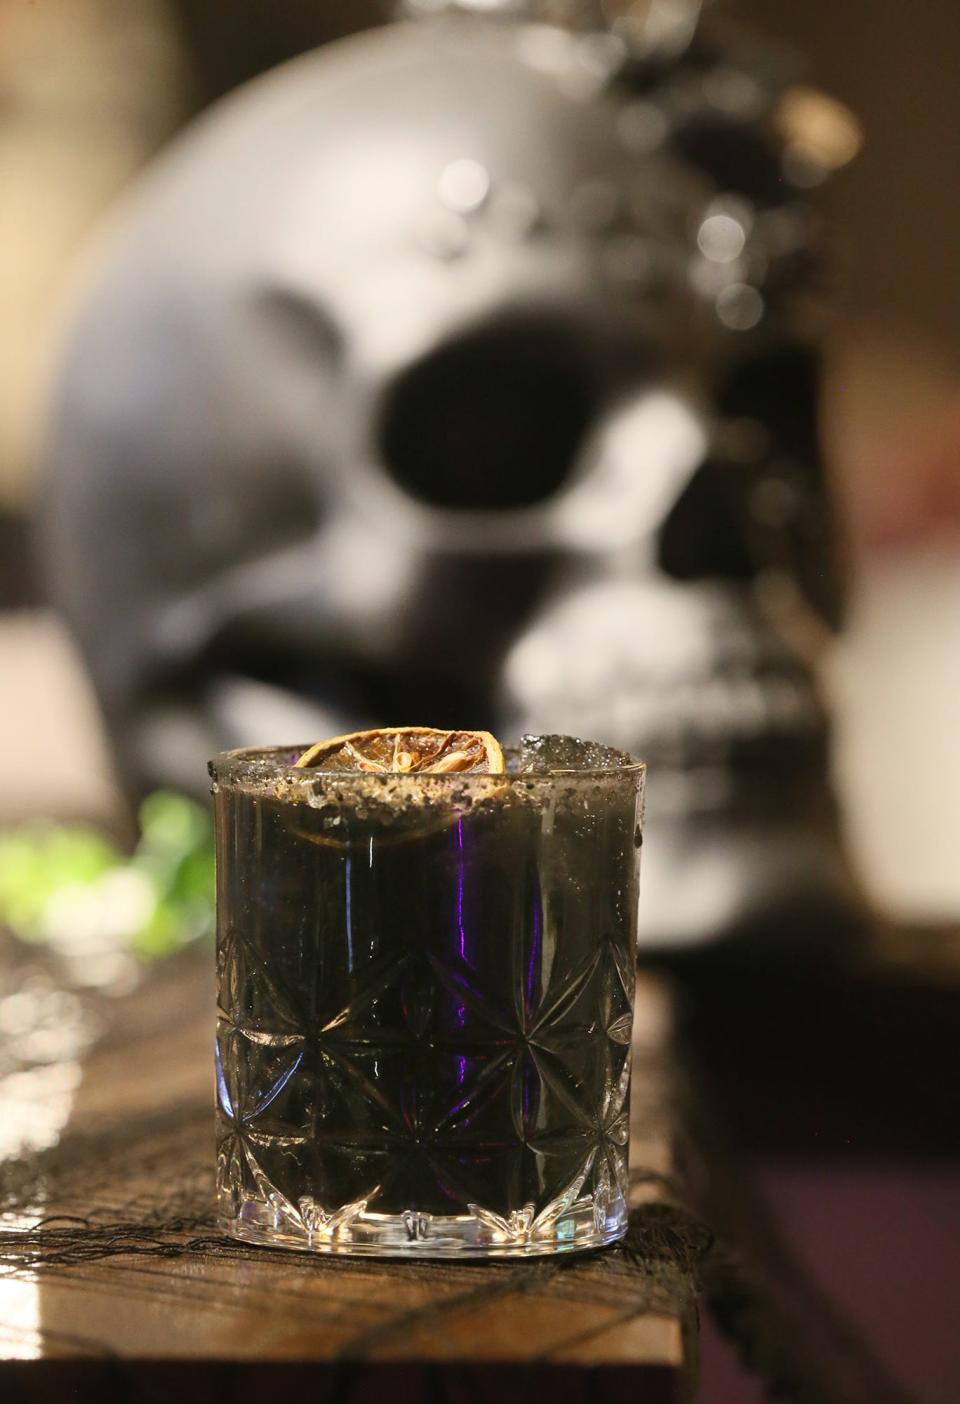 The Wednesday Adams cocktail, which features black currant liqueur, vodka, Kahlua coffee liqueur and ginger beer, is one of the Halloween-themed cocktails at The Daily Pressed, which has created a Halloween pop-up bar.